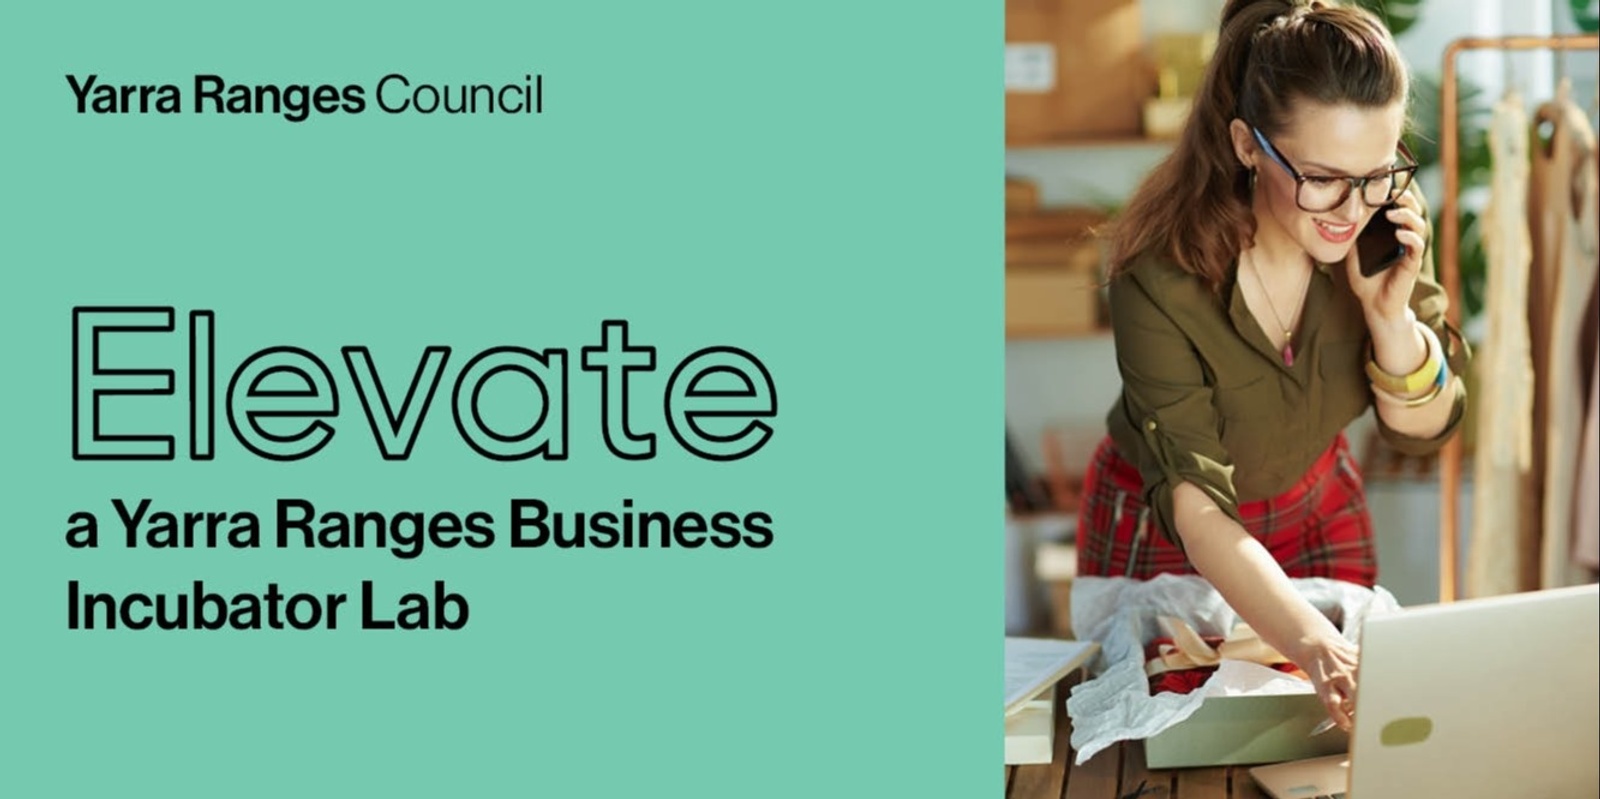 Banner image for Elevate - a Yarra Ranges Business Incubator Lab